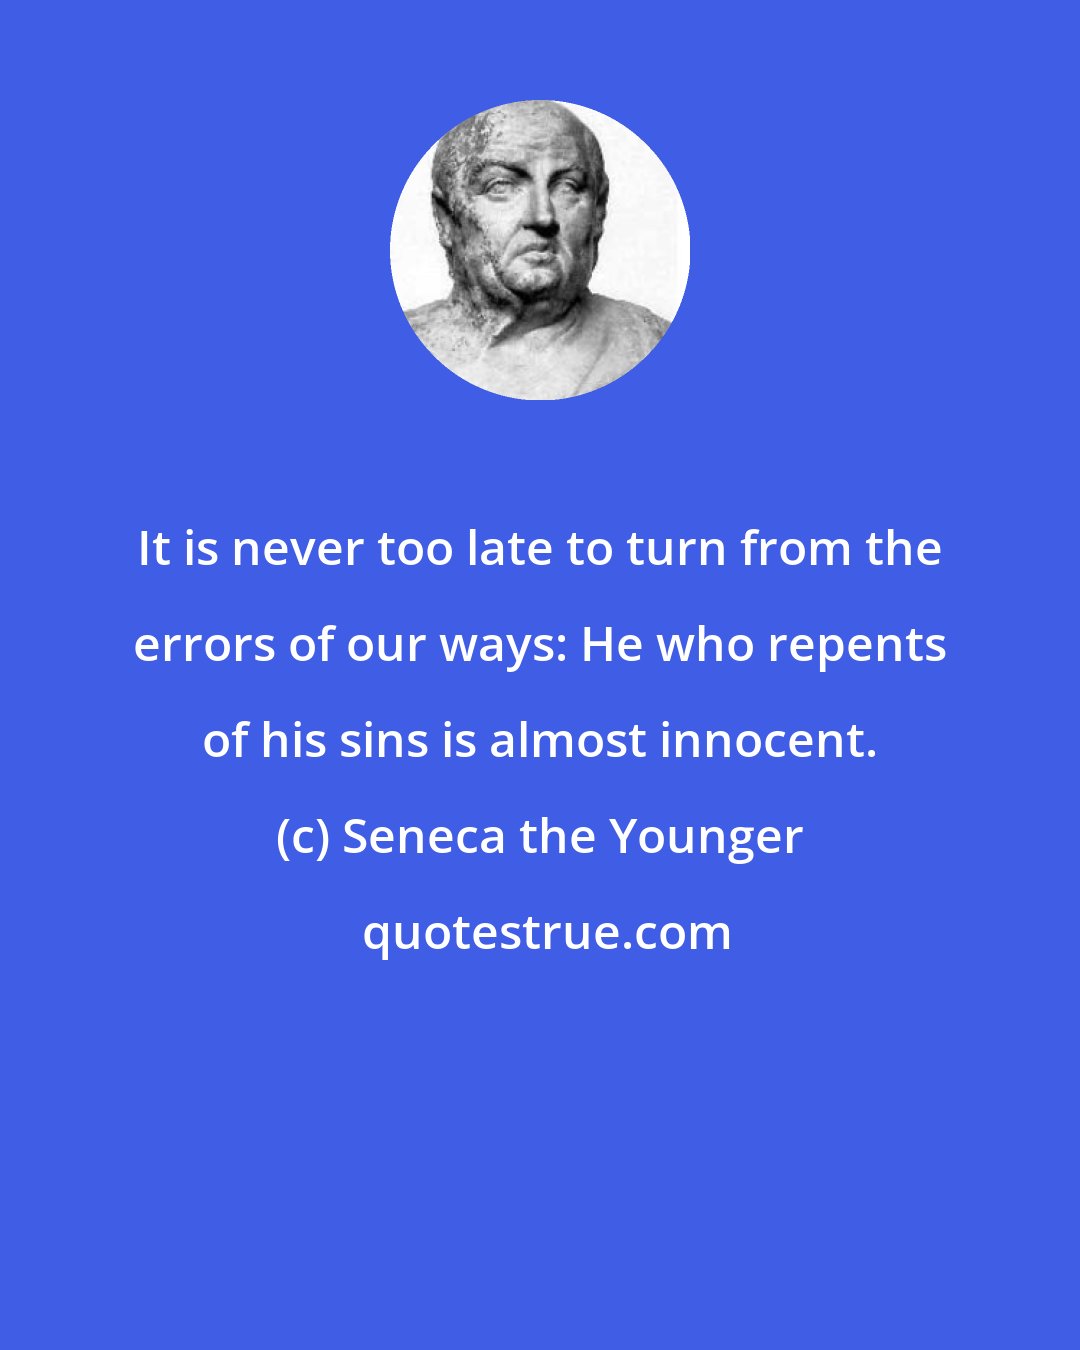 Seneca the Younger: It is never too late to turn from the errors of our ways: He who repents of his sins is almost innocent.